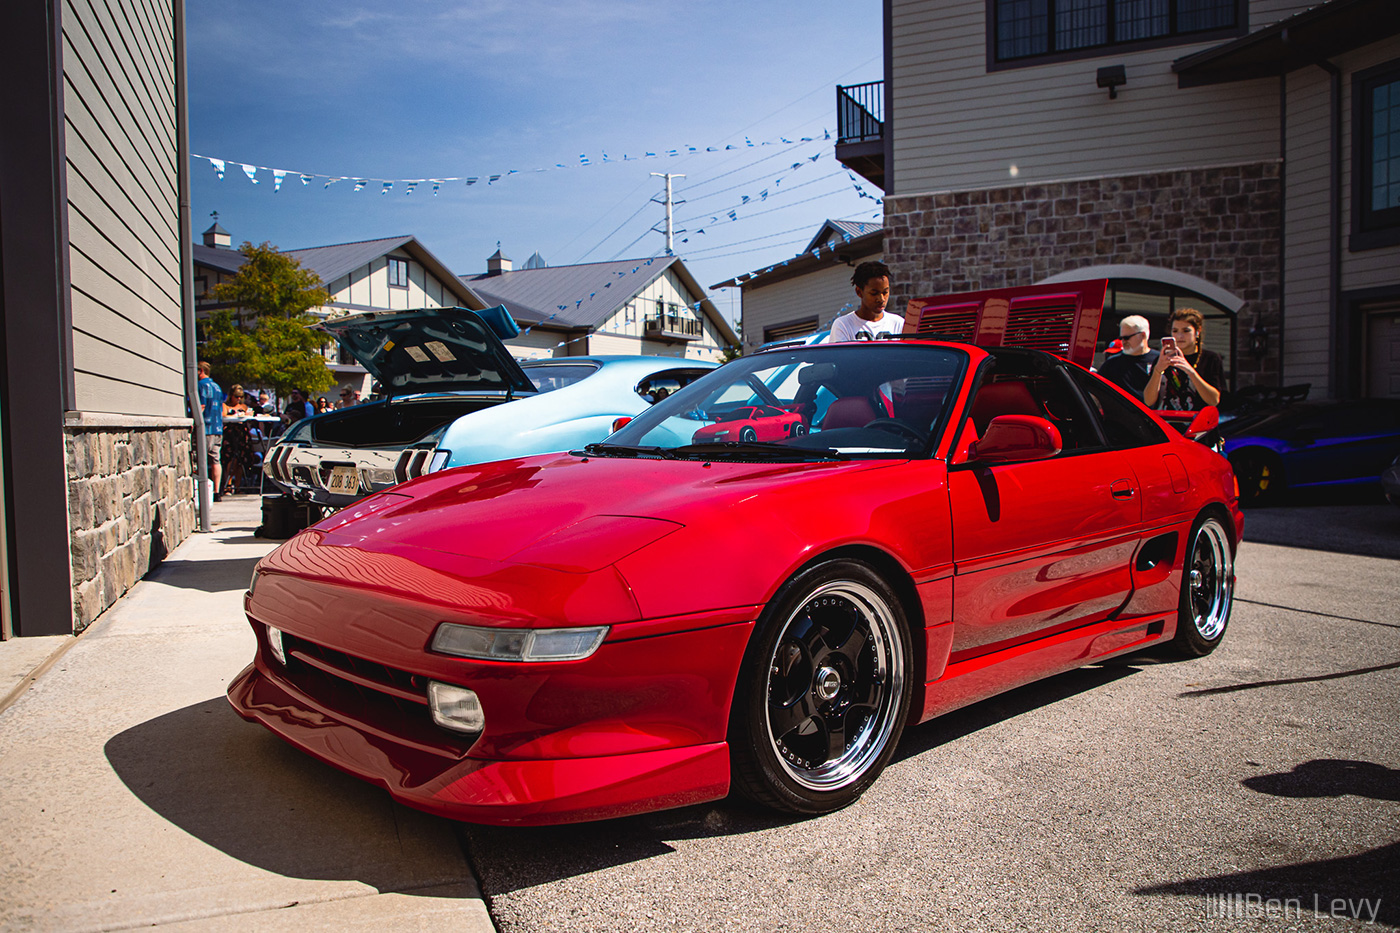 Red Toyota MR2 at Iron Gate Motor Condos